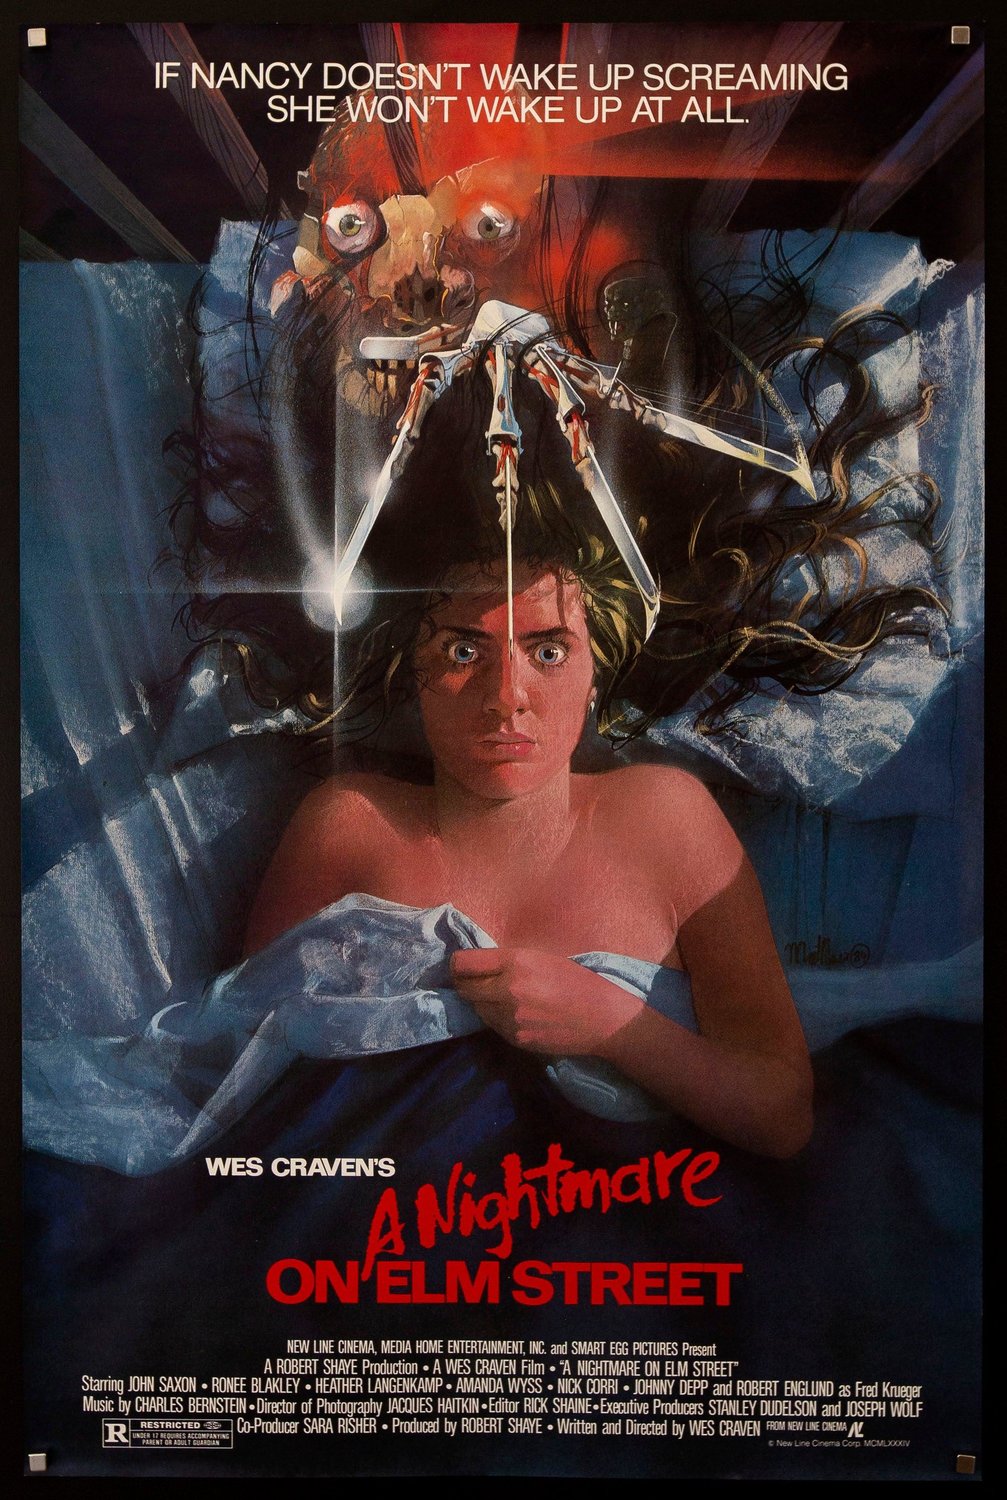 Quality Scary screens 1984’s “A Nightmare on Elm Street.”